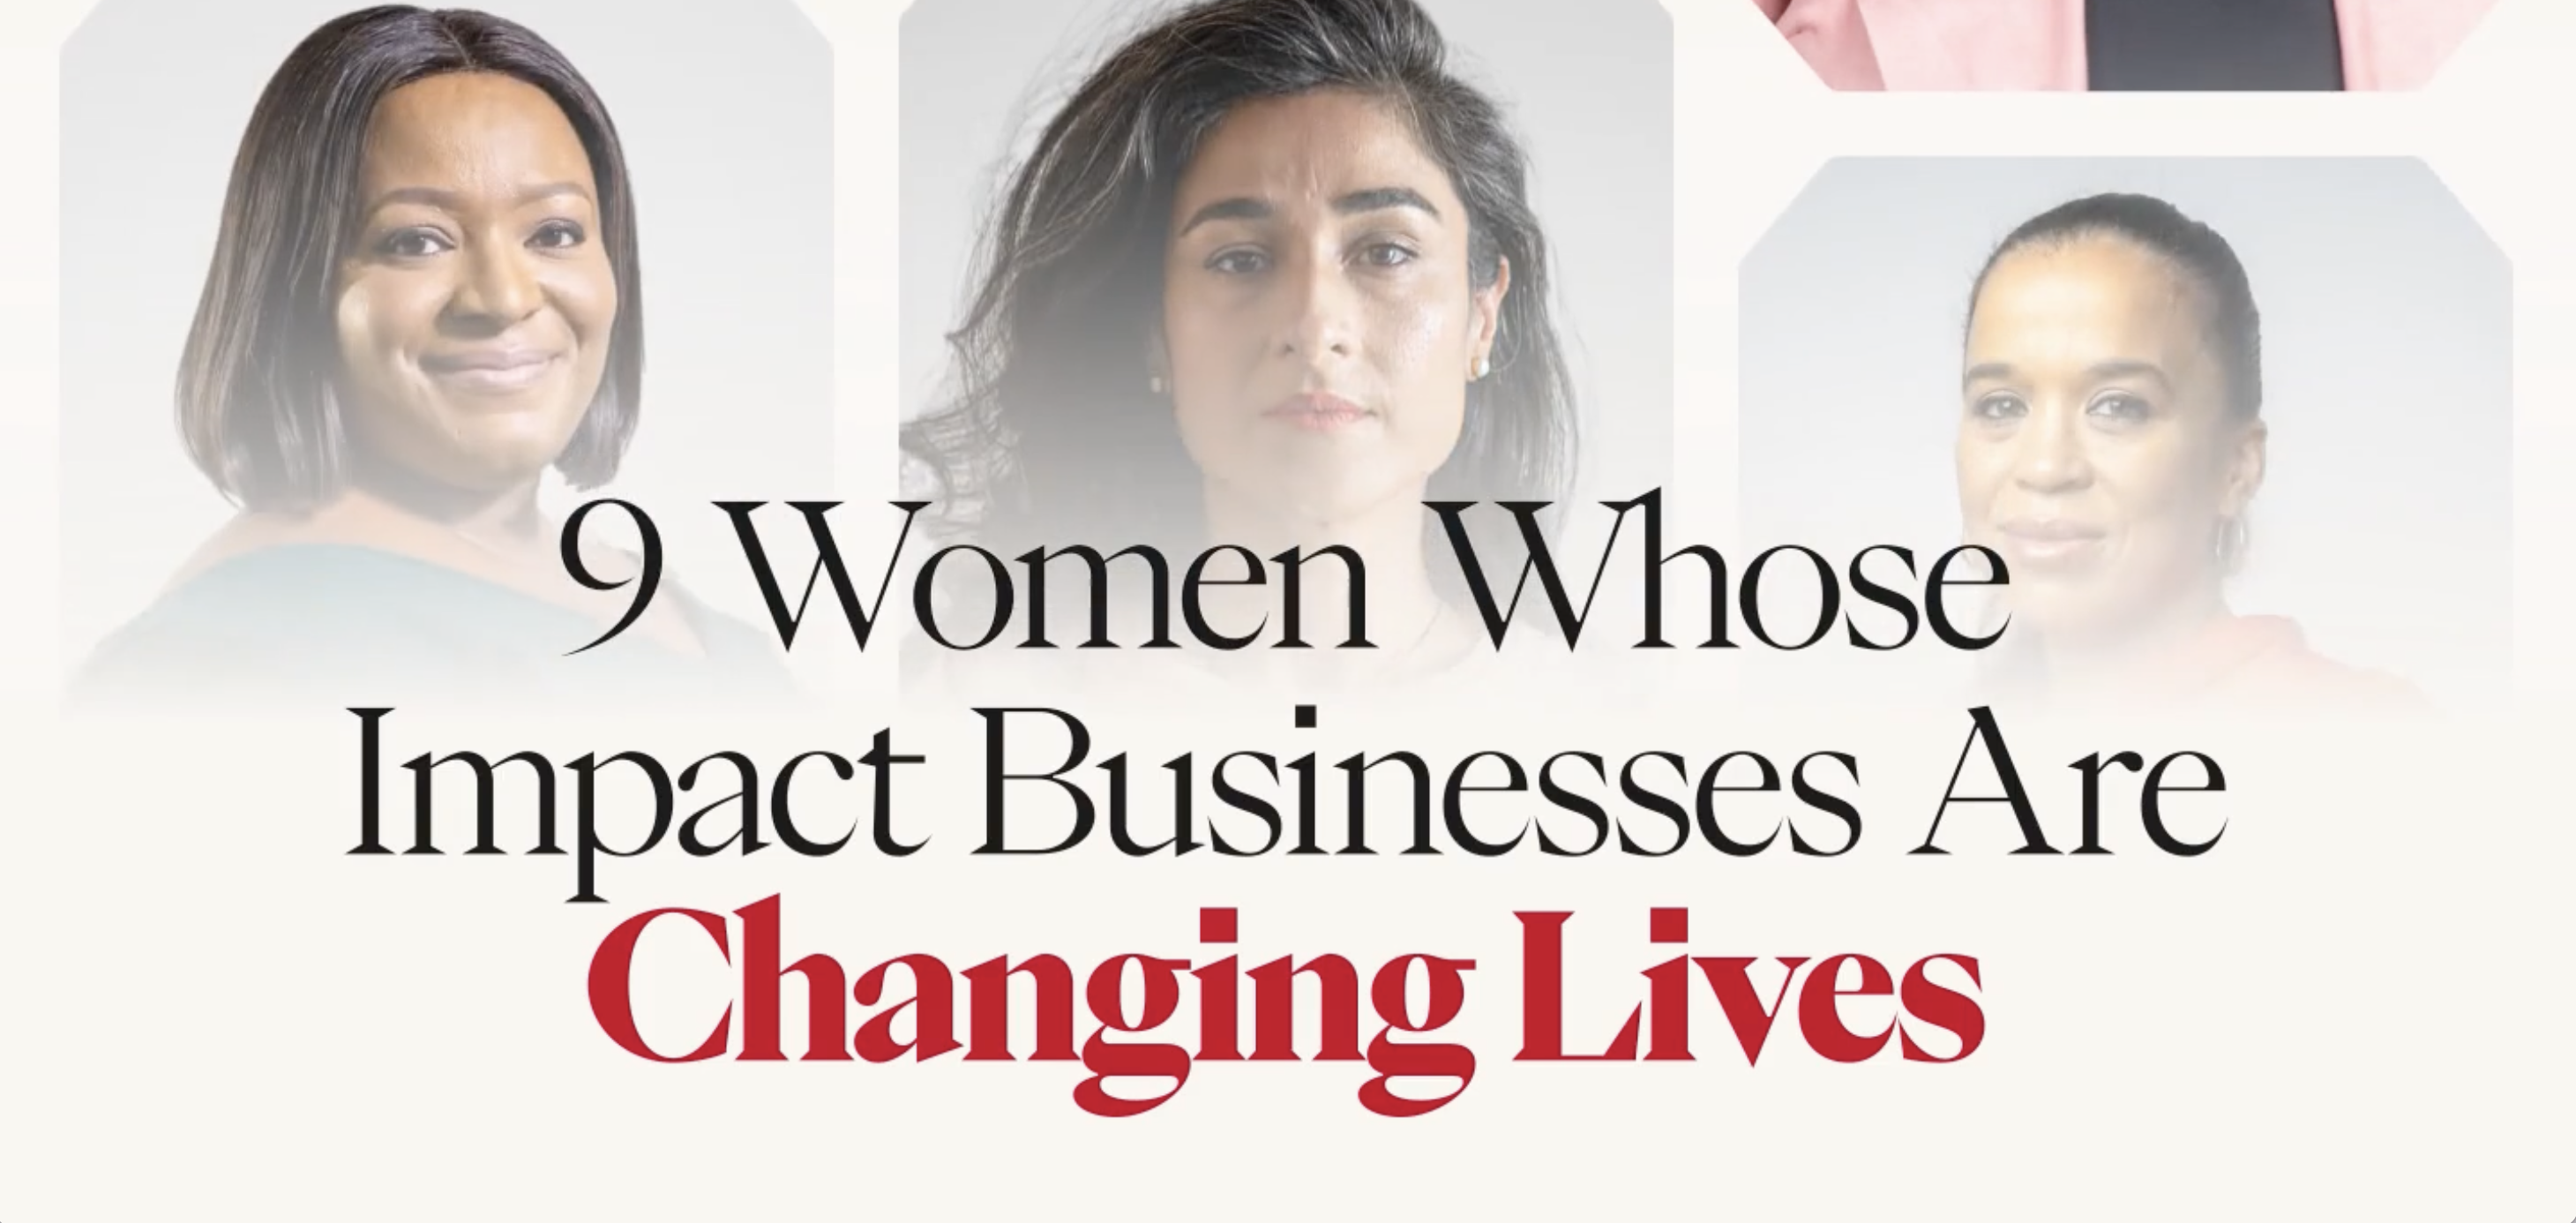 Cartier Women's Initiative with Forbes